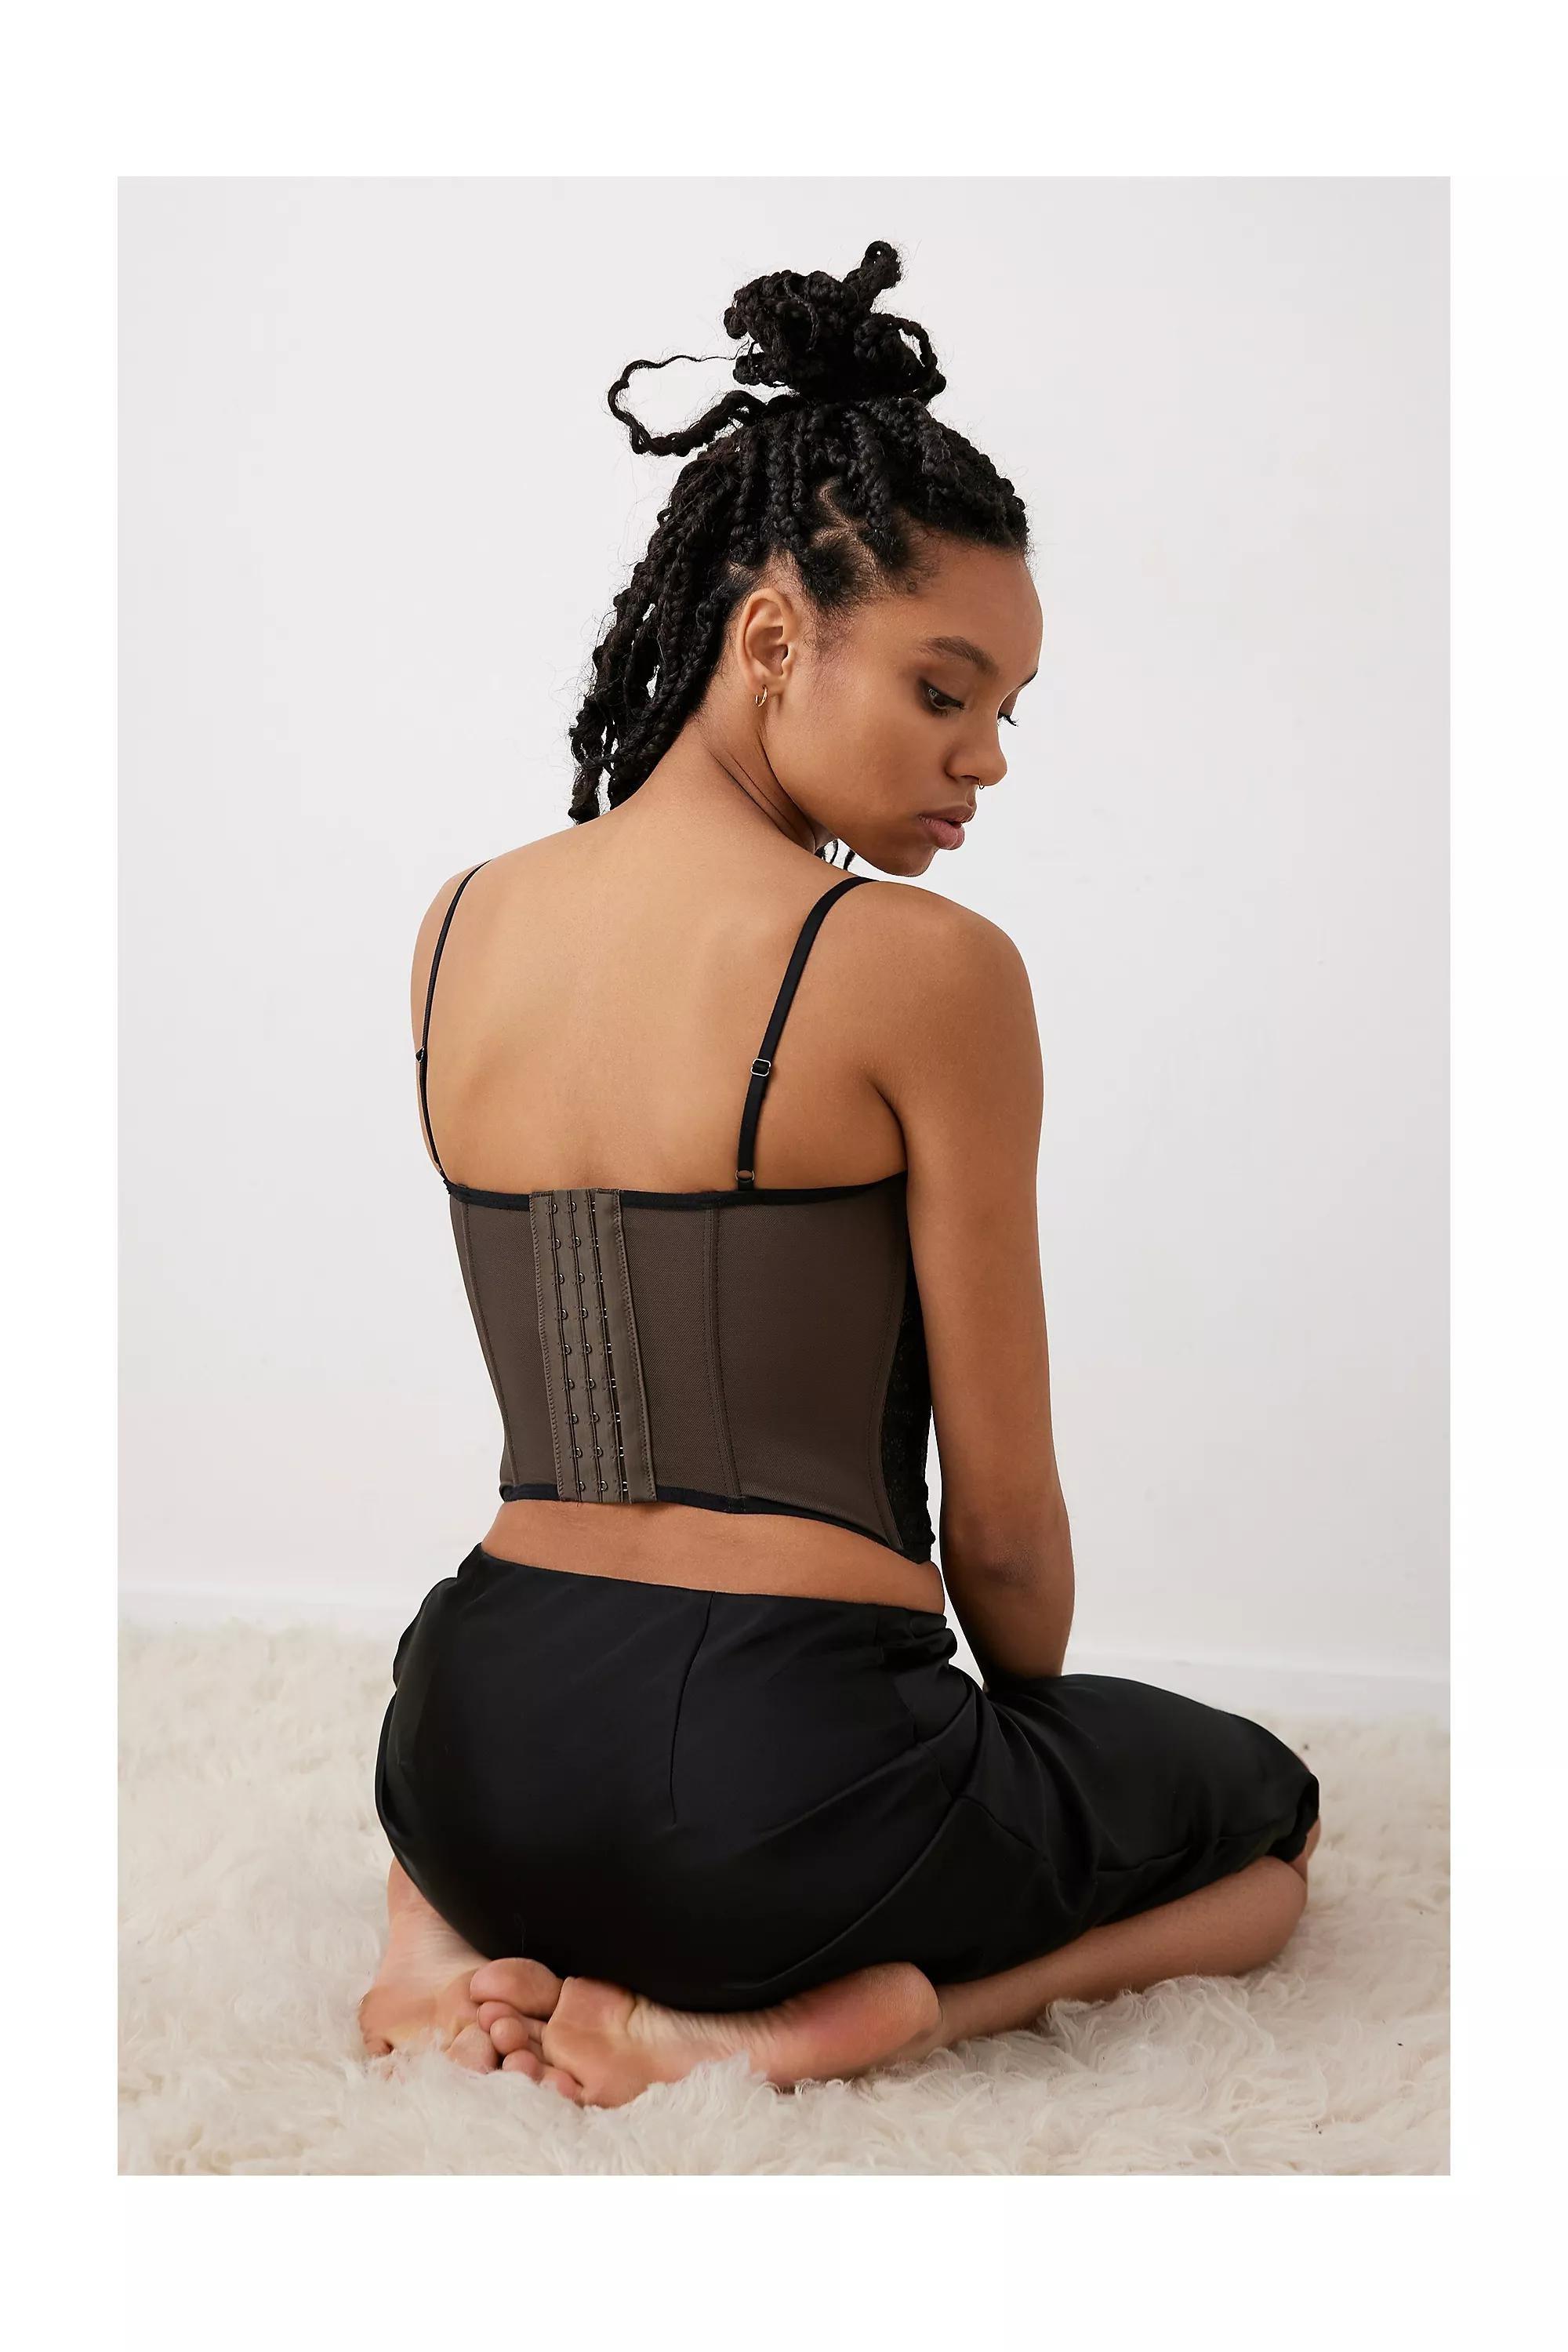 Urban Outfitters Out From Under Modern Love Corset Size M - $48 - From Deja